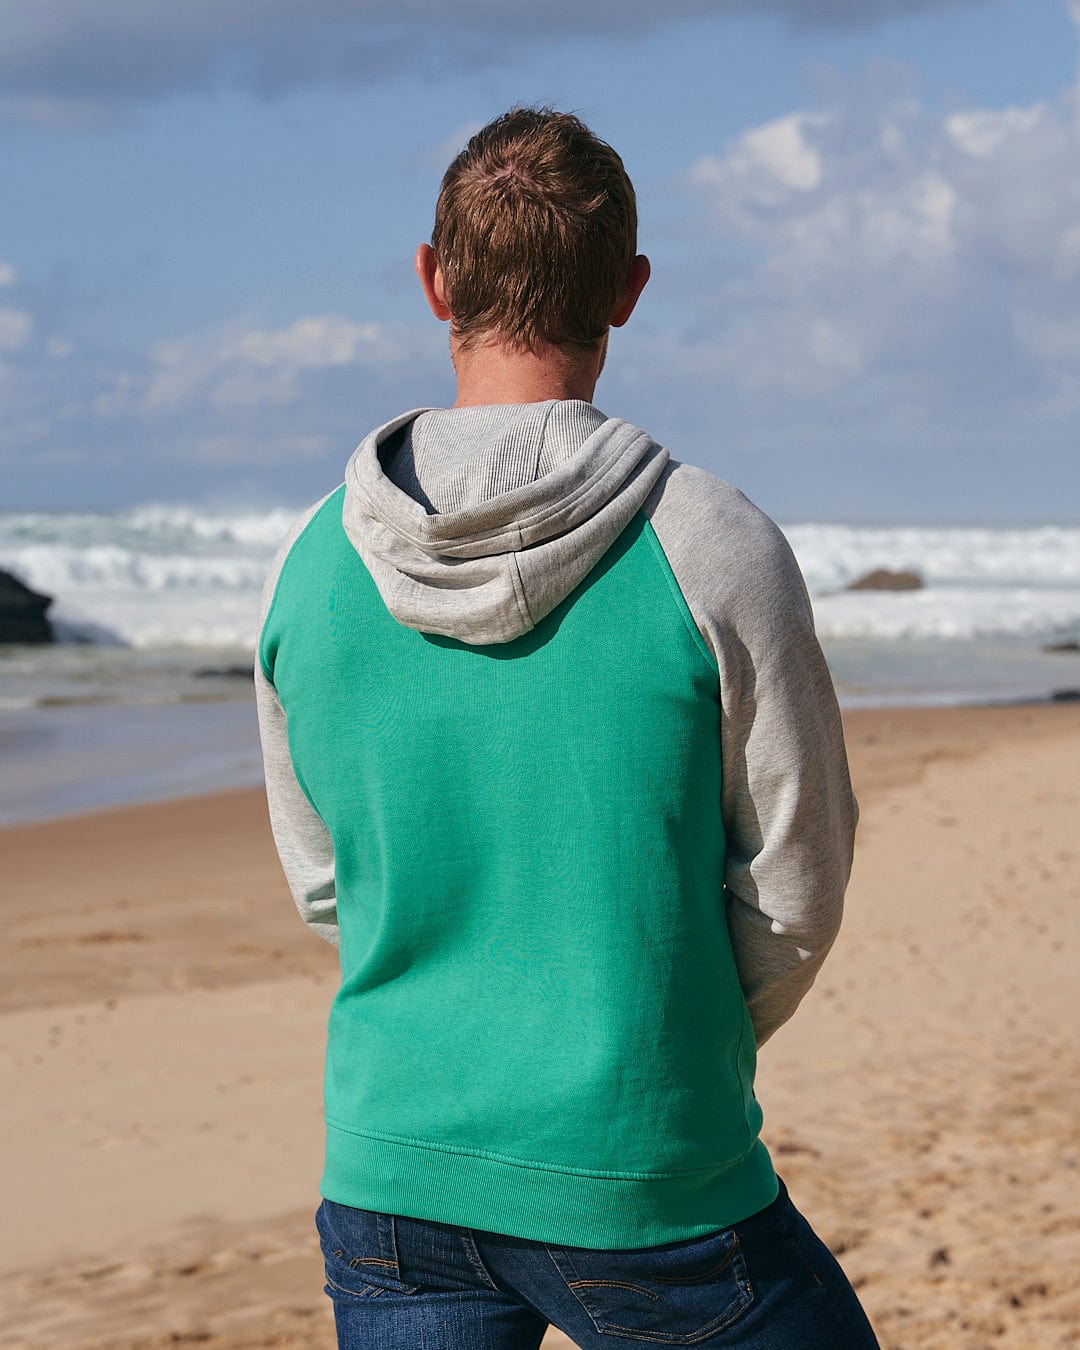 A man standing on a beach with his back to the ocean wearing a Saltrock Stencil - Mens Zip Hoodie - Green.